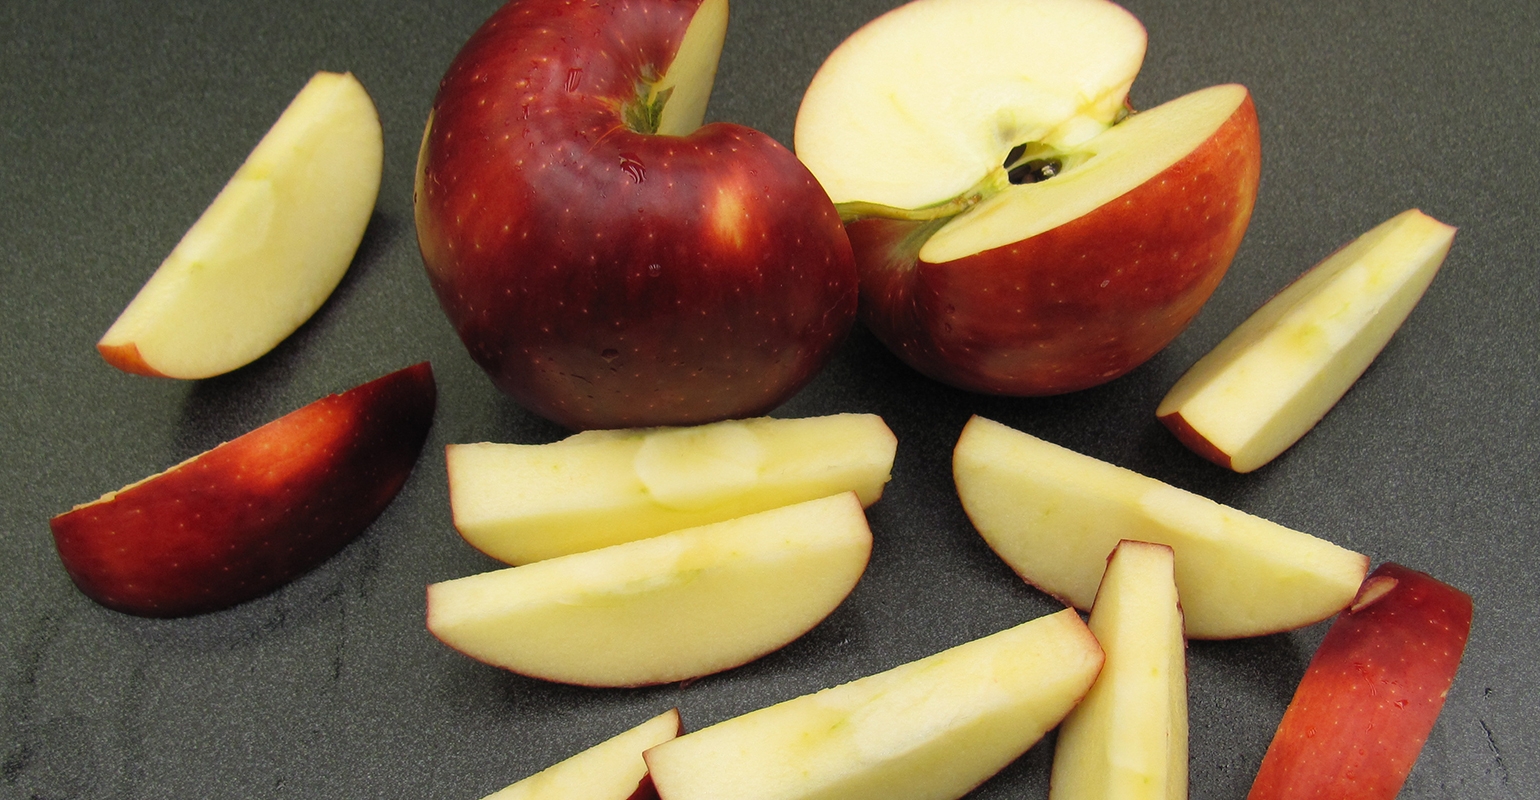 The Fresh Market - Cosmic Crisp Apples are an organic, juicy, and